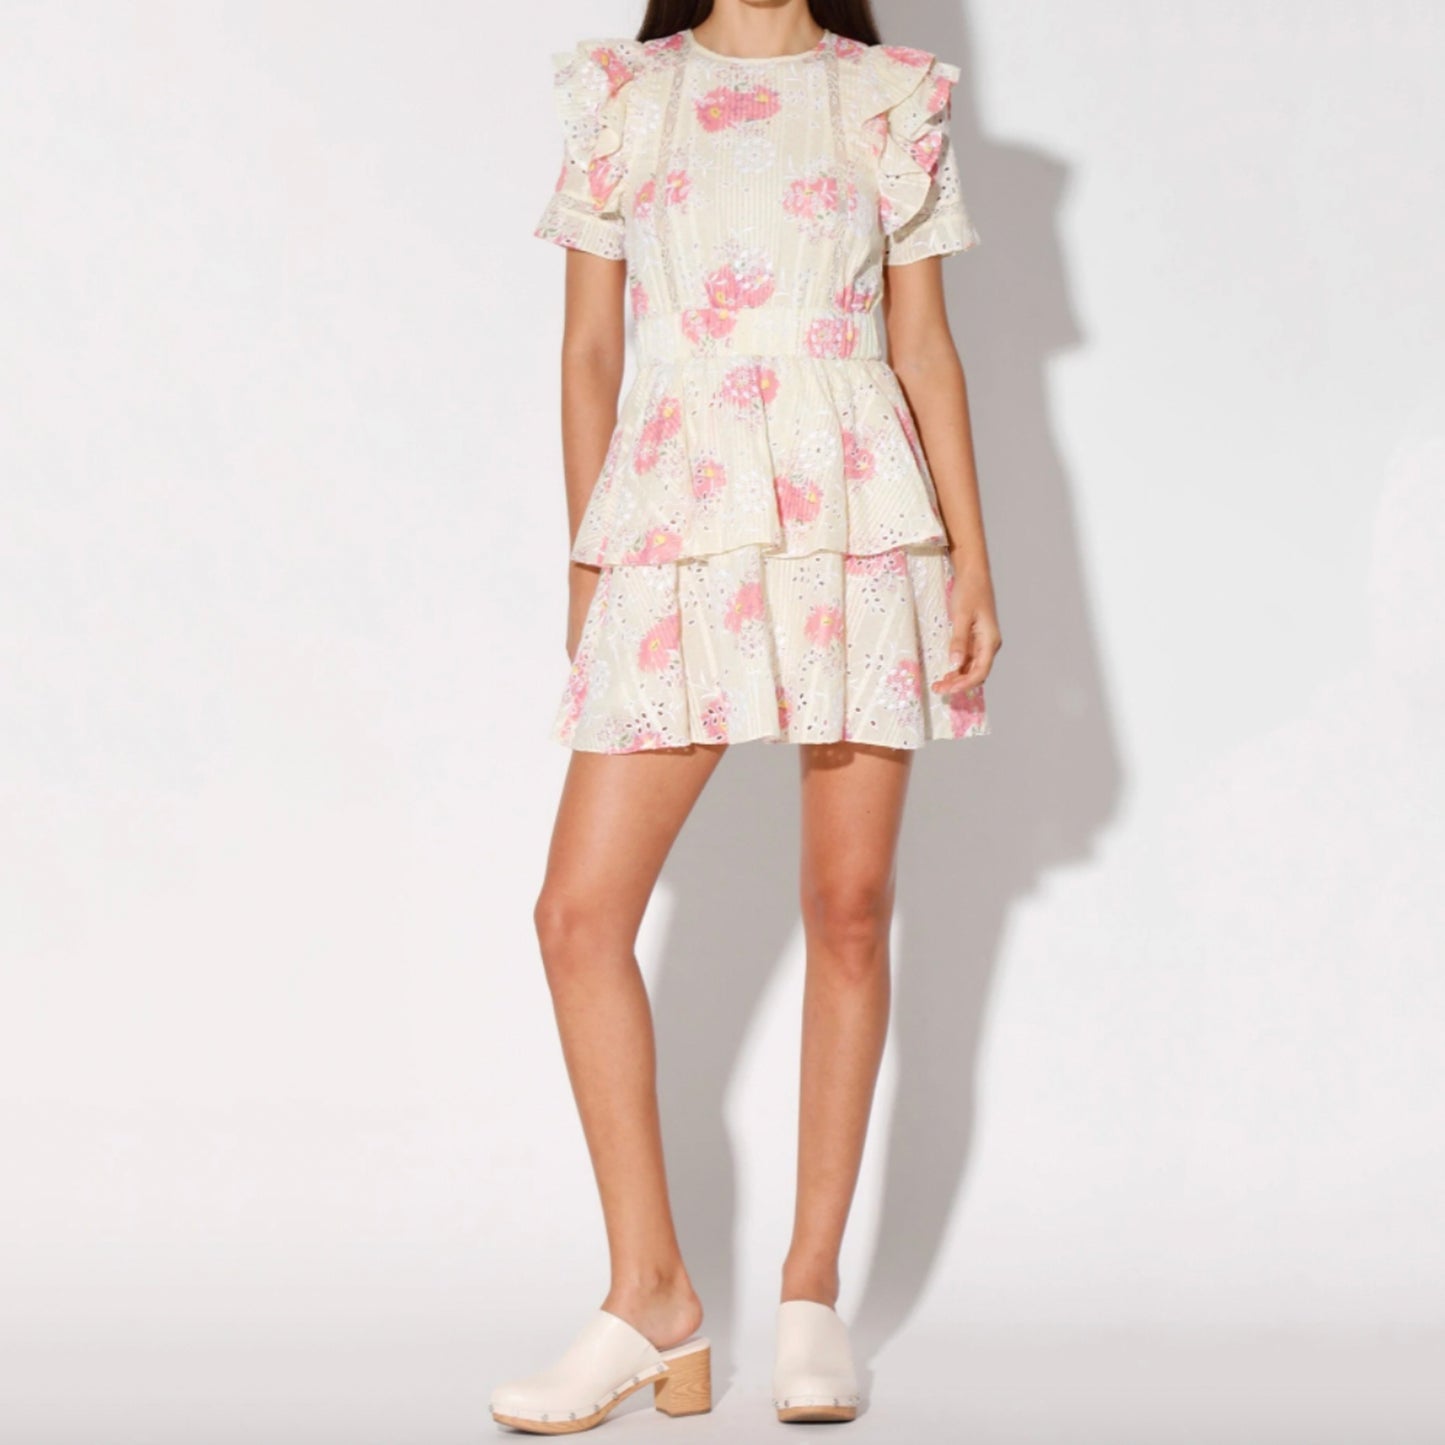 Walter Baker Cassandra Dress. The Cassandra Dress is a pretty perfection with ruffle detail short sleeves and layered flounce skirt! Dress it up with kitten heels or go laid back in sneakers